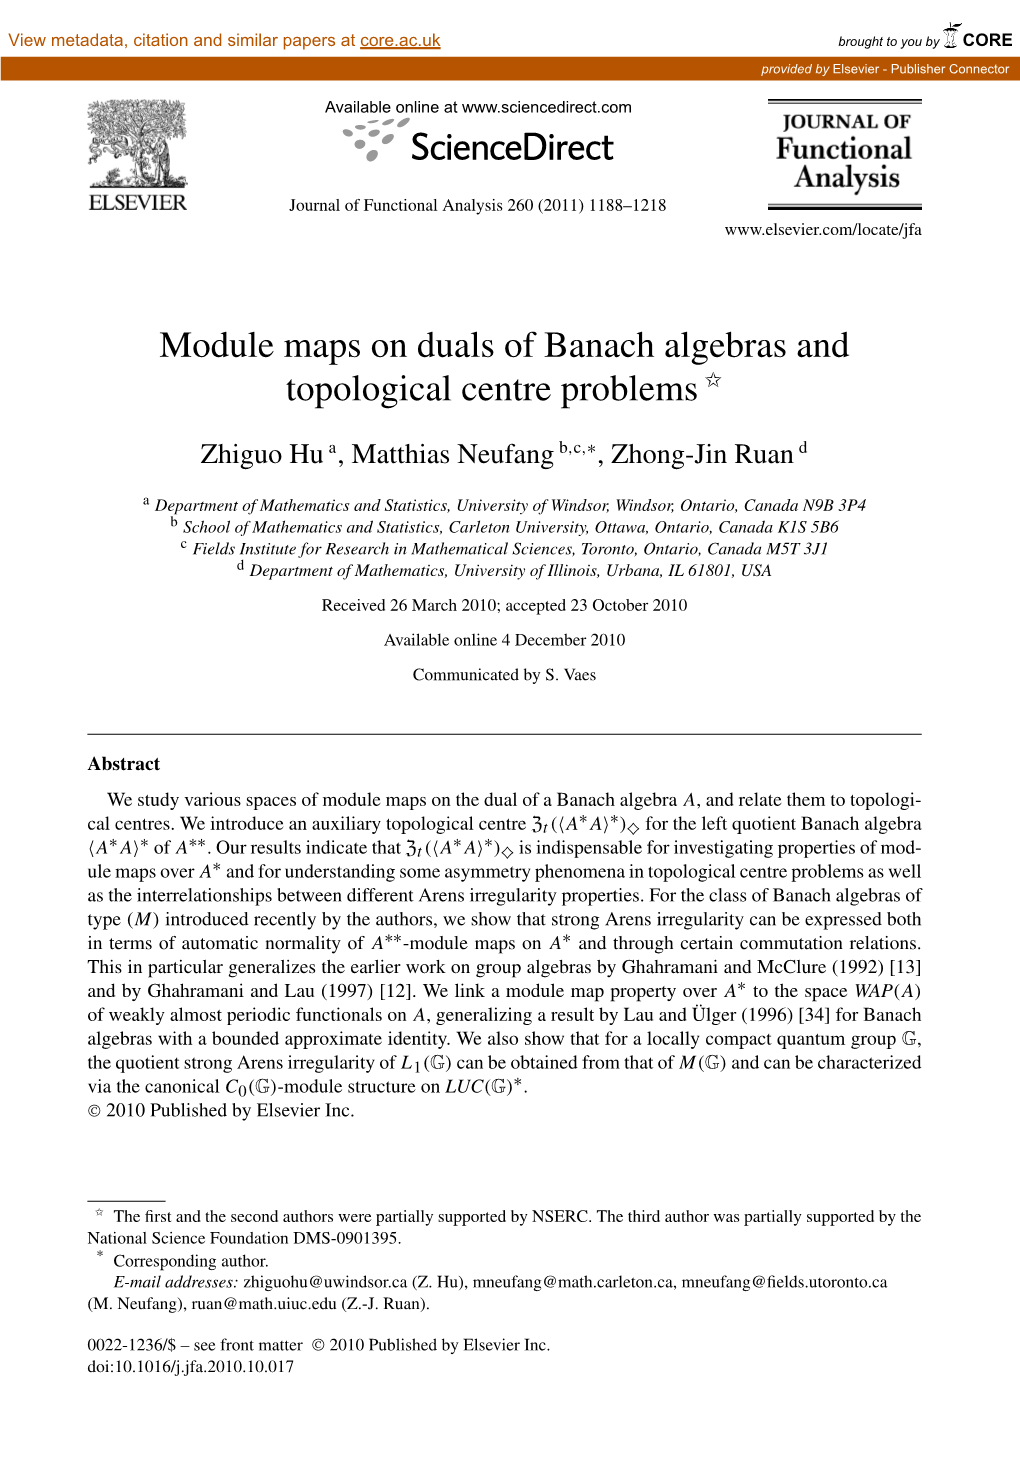 Module Maps on Duals of Banach Algebras and Topological Centre Problems ✩